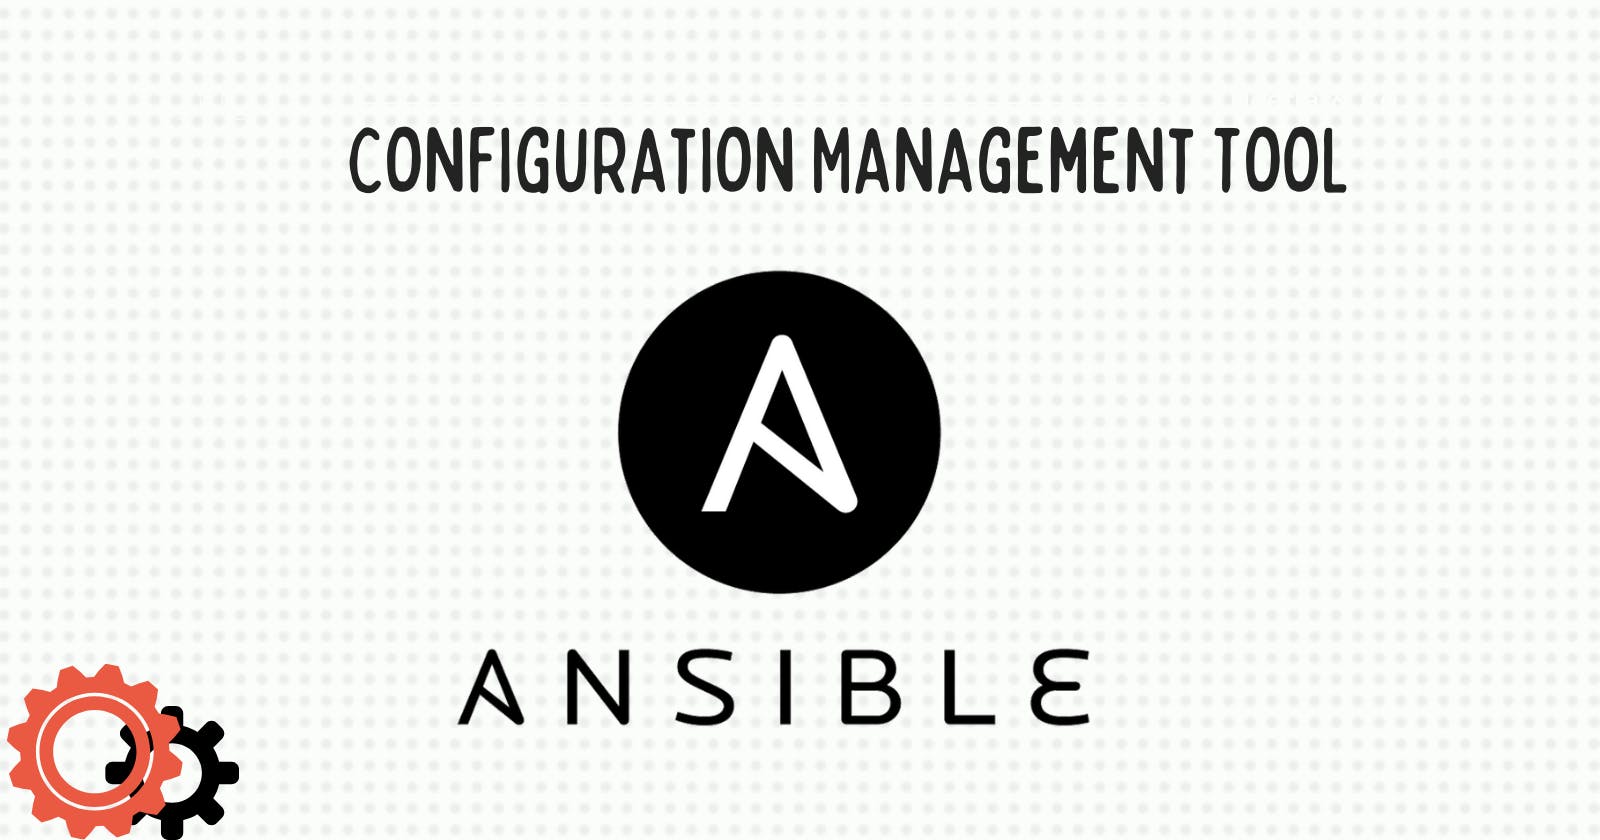 Introduction to Ansible: The Configuration Management Tool